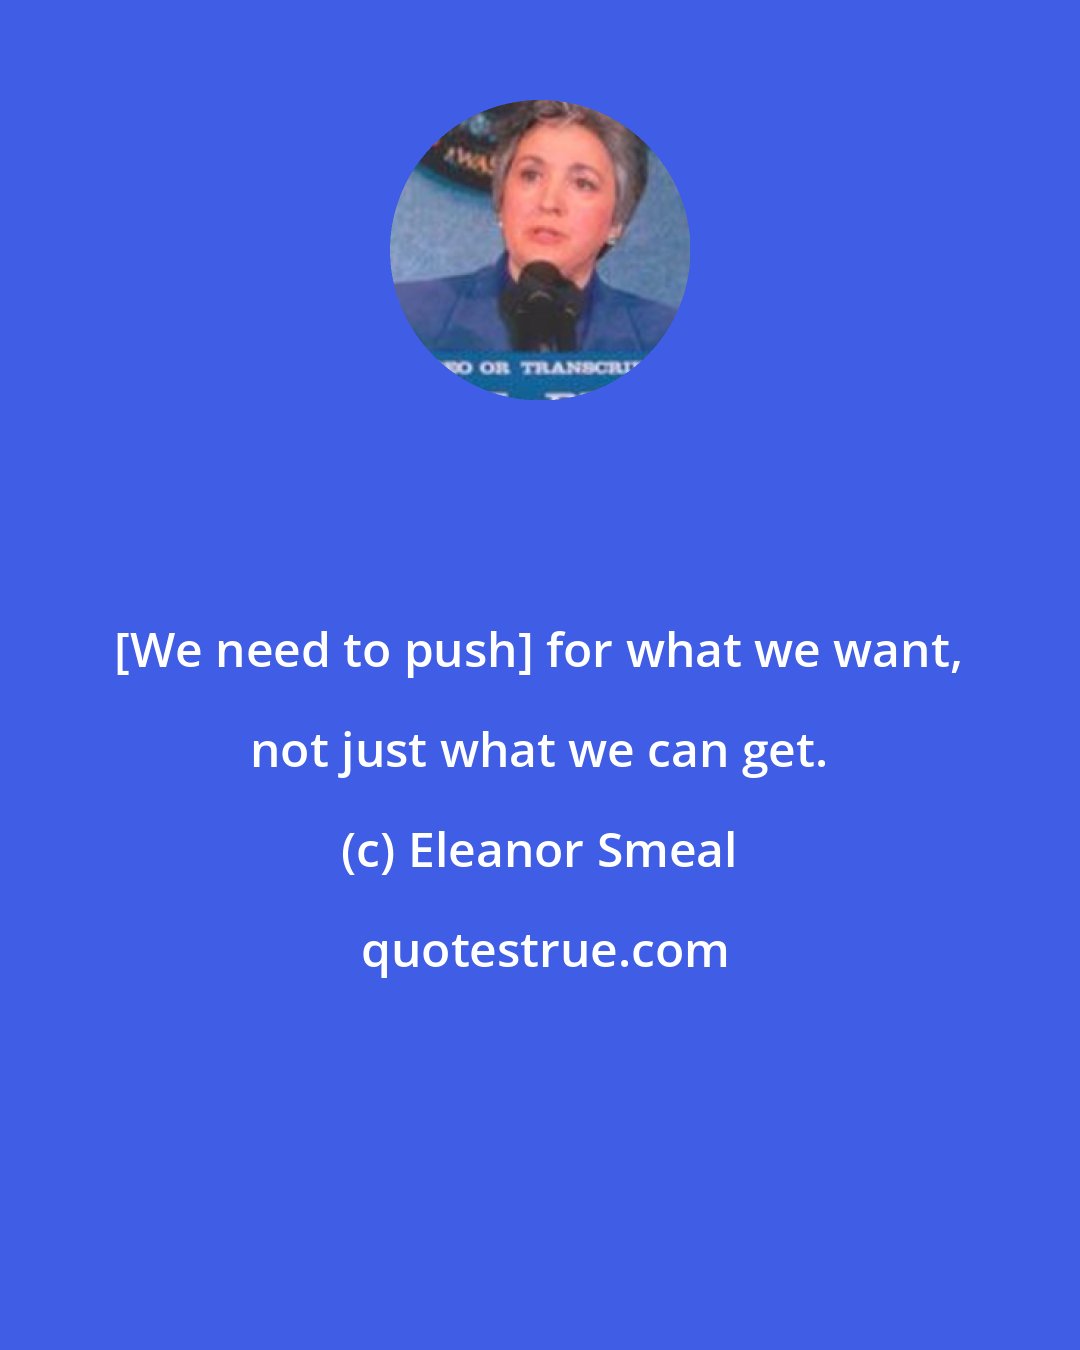 Eleanor Smeal: [We need to push] for what we want, not just what we can get.